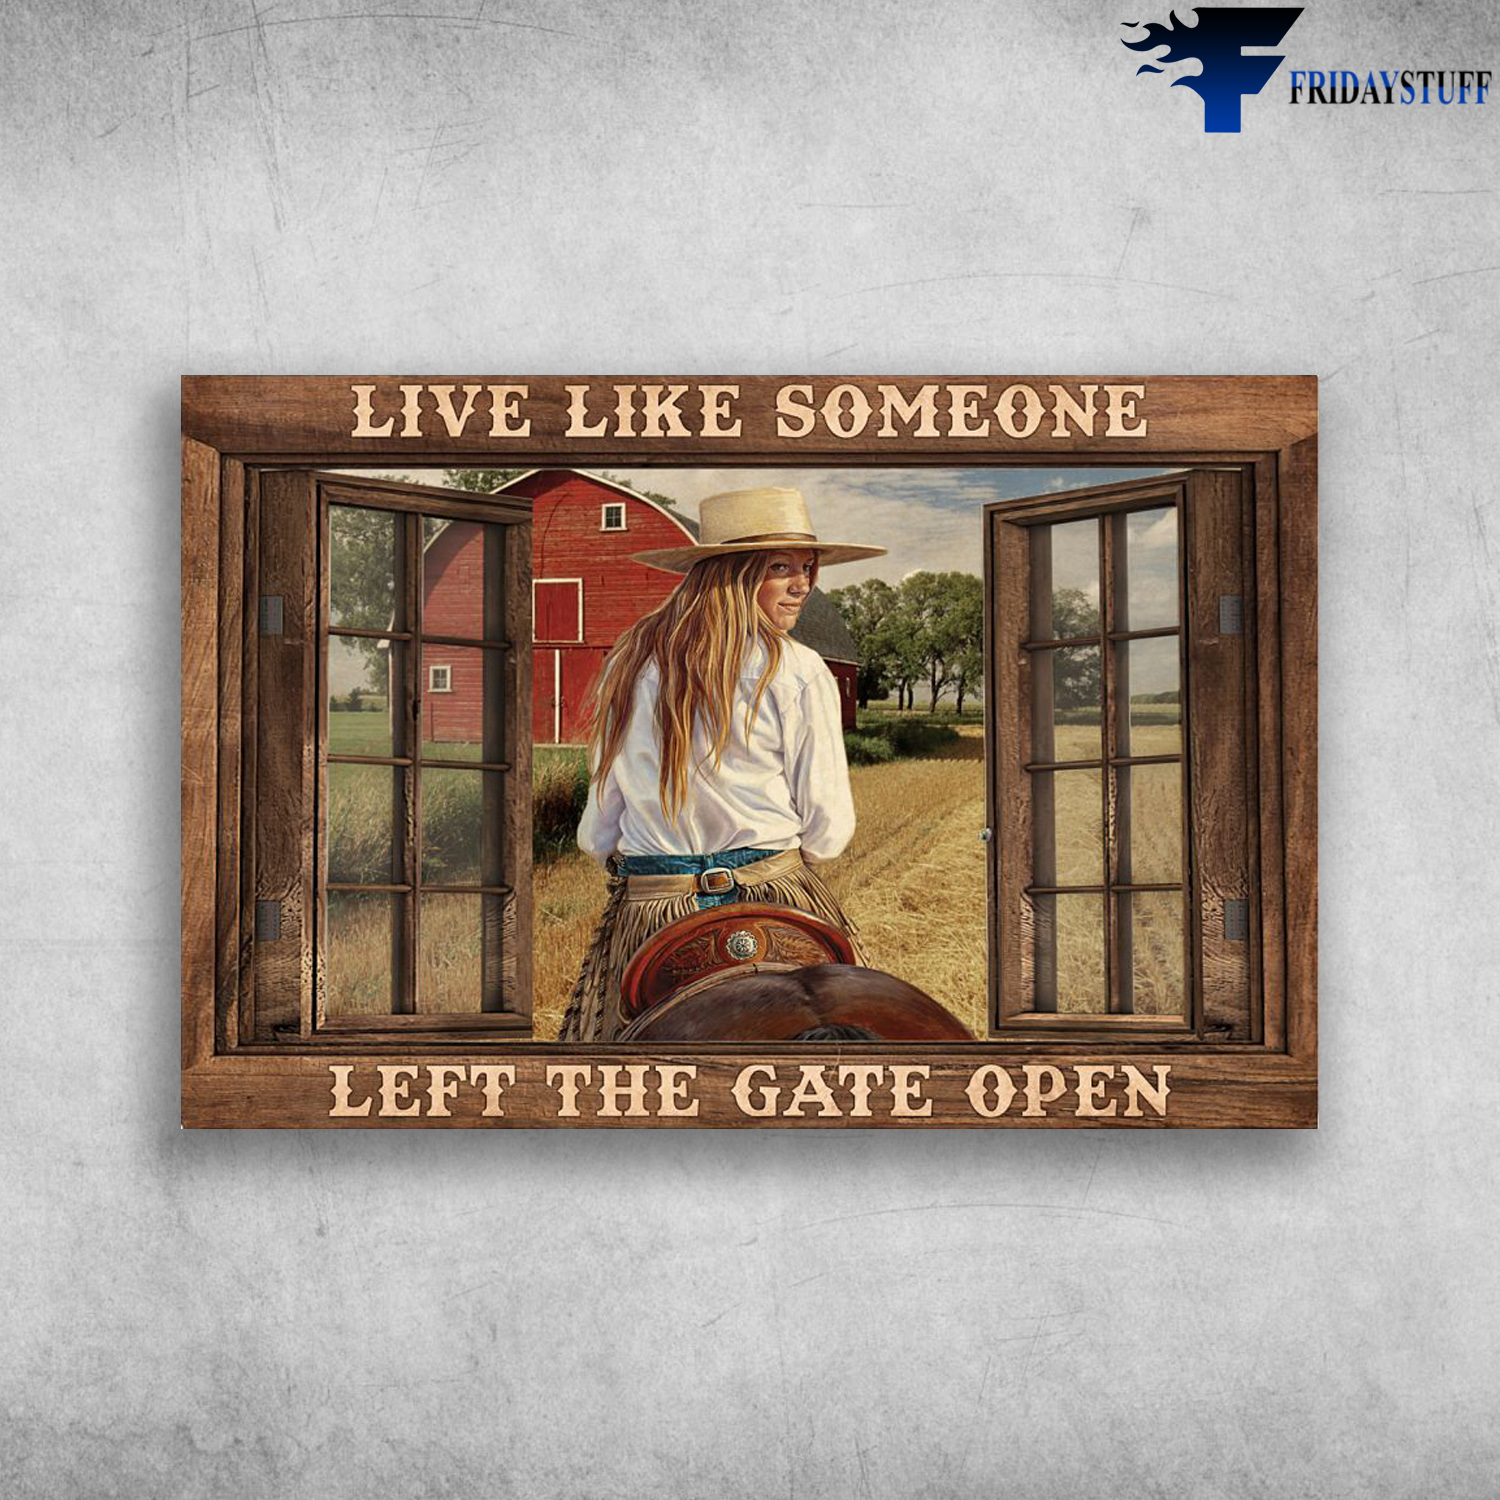 Cowgirl Riding The Horse - Live Like Someone, Left The Gate Open